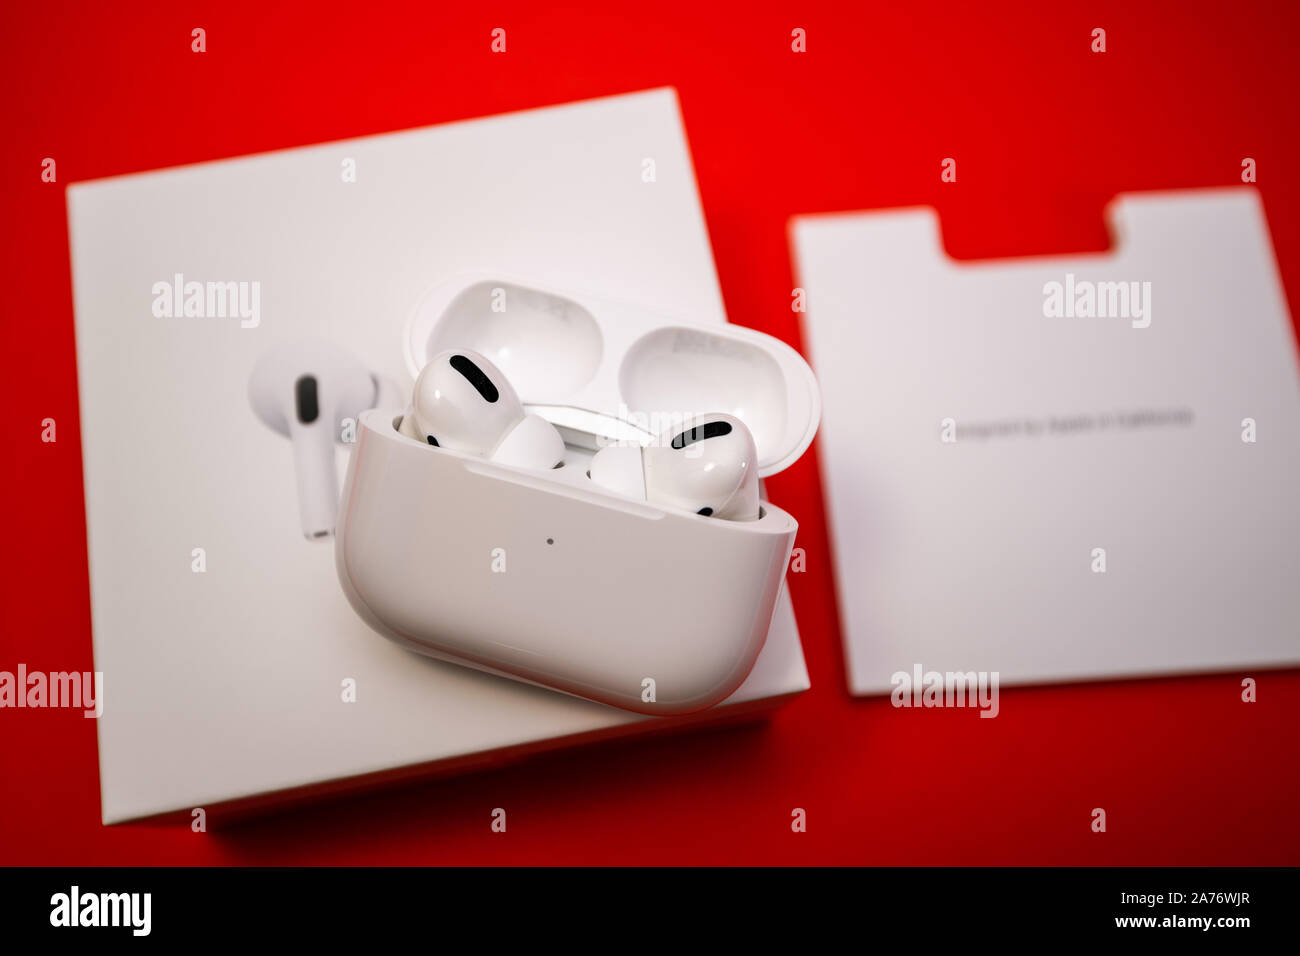 Paris, France - Oct 30, 2019: Unboxing unpacking of the new Apple Computers AirPods  Pro headphones with Active Noise Cancellation for immersive sound Stock  Photo - Alamy